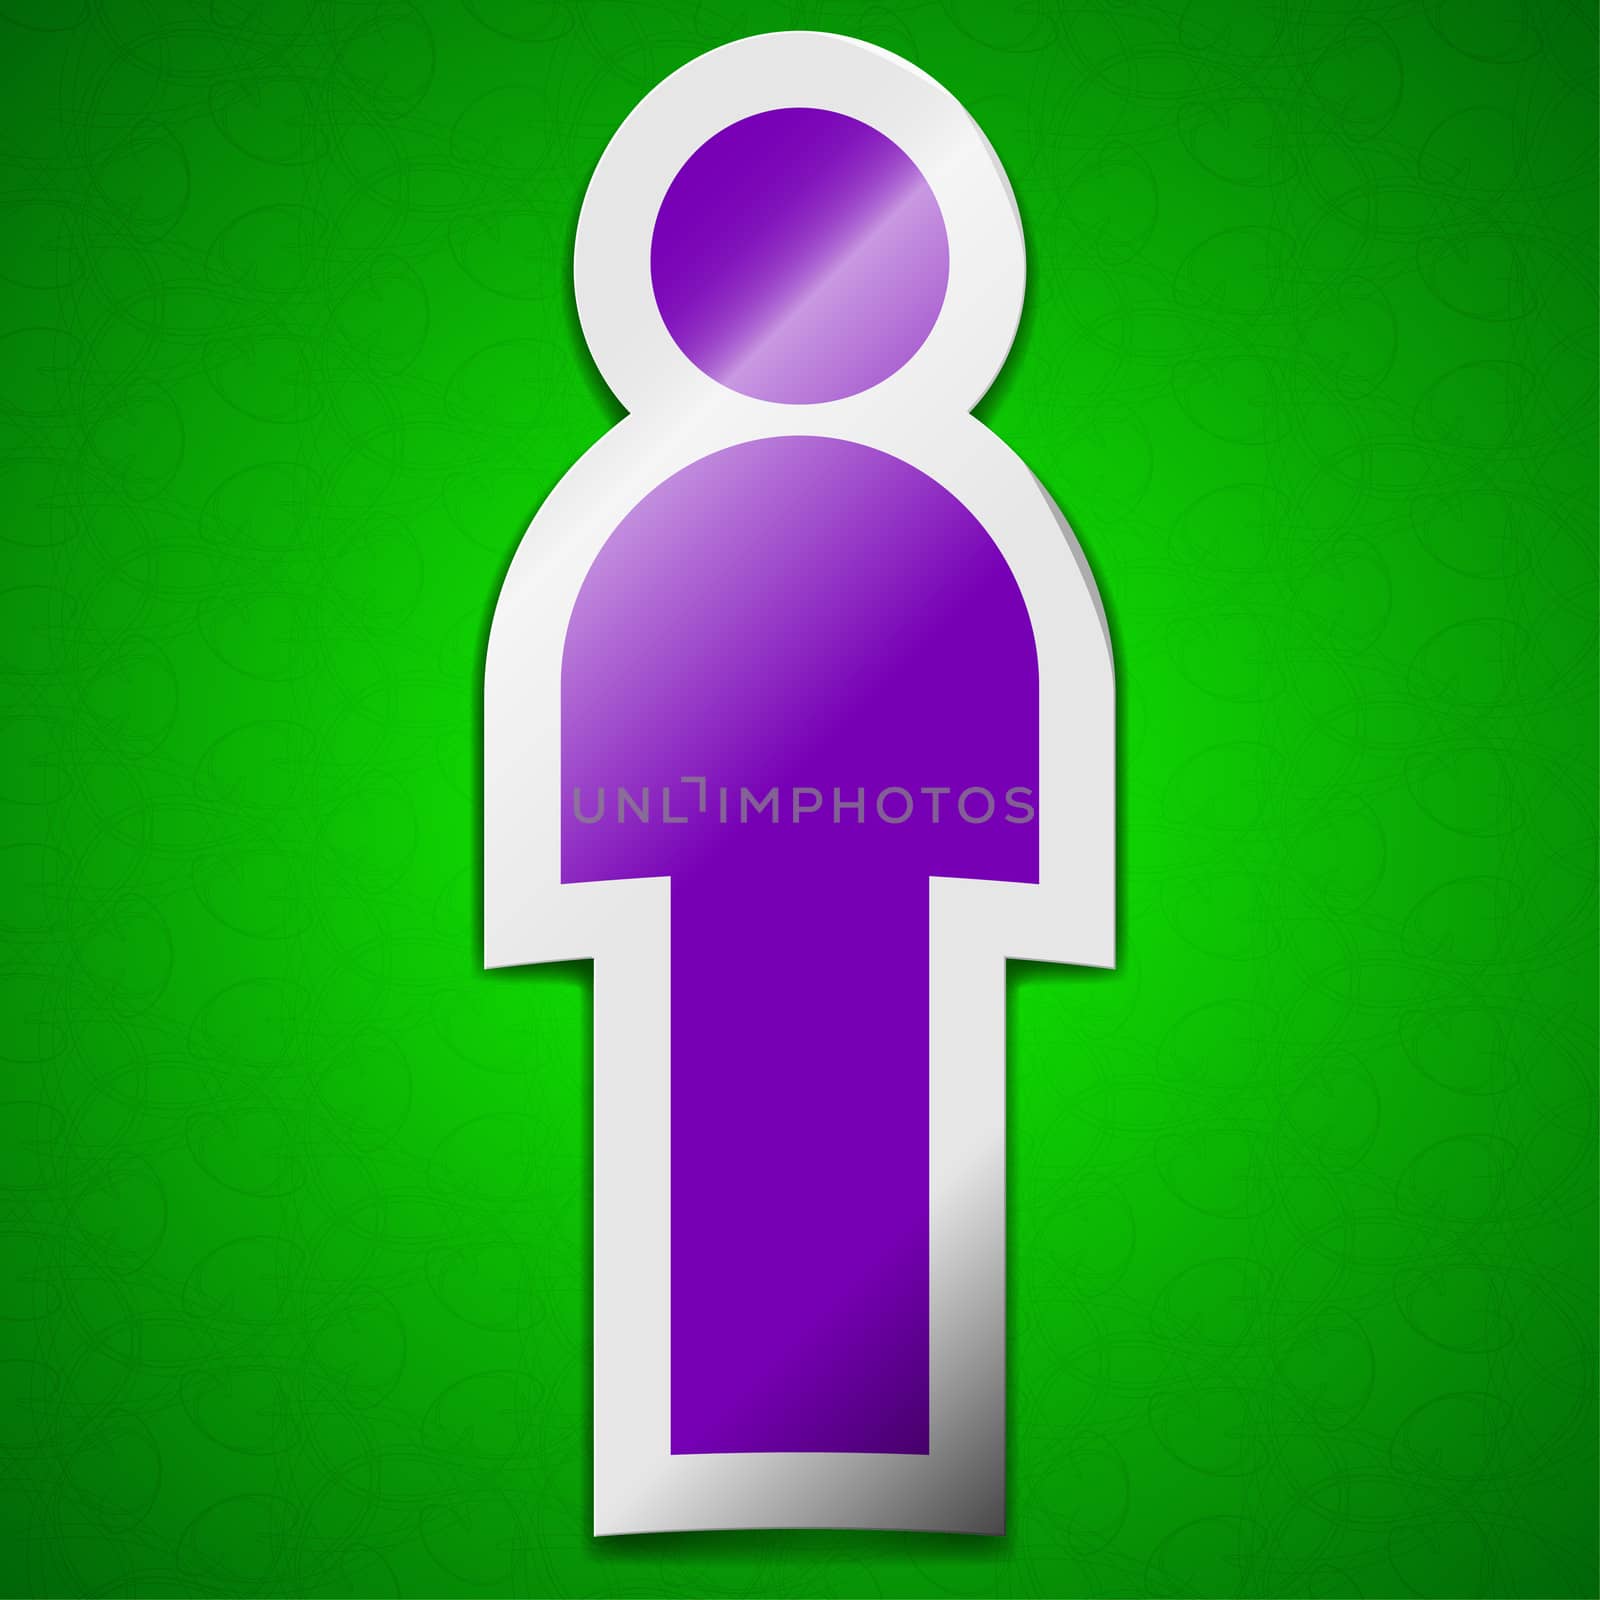 Human icon sign. Symbol chic colored sticky label on green background.  illustration